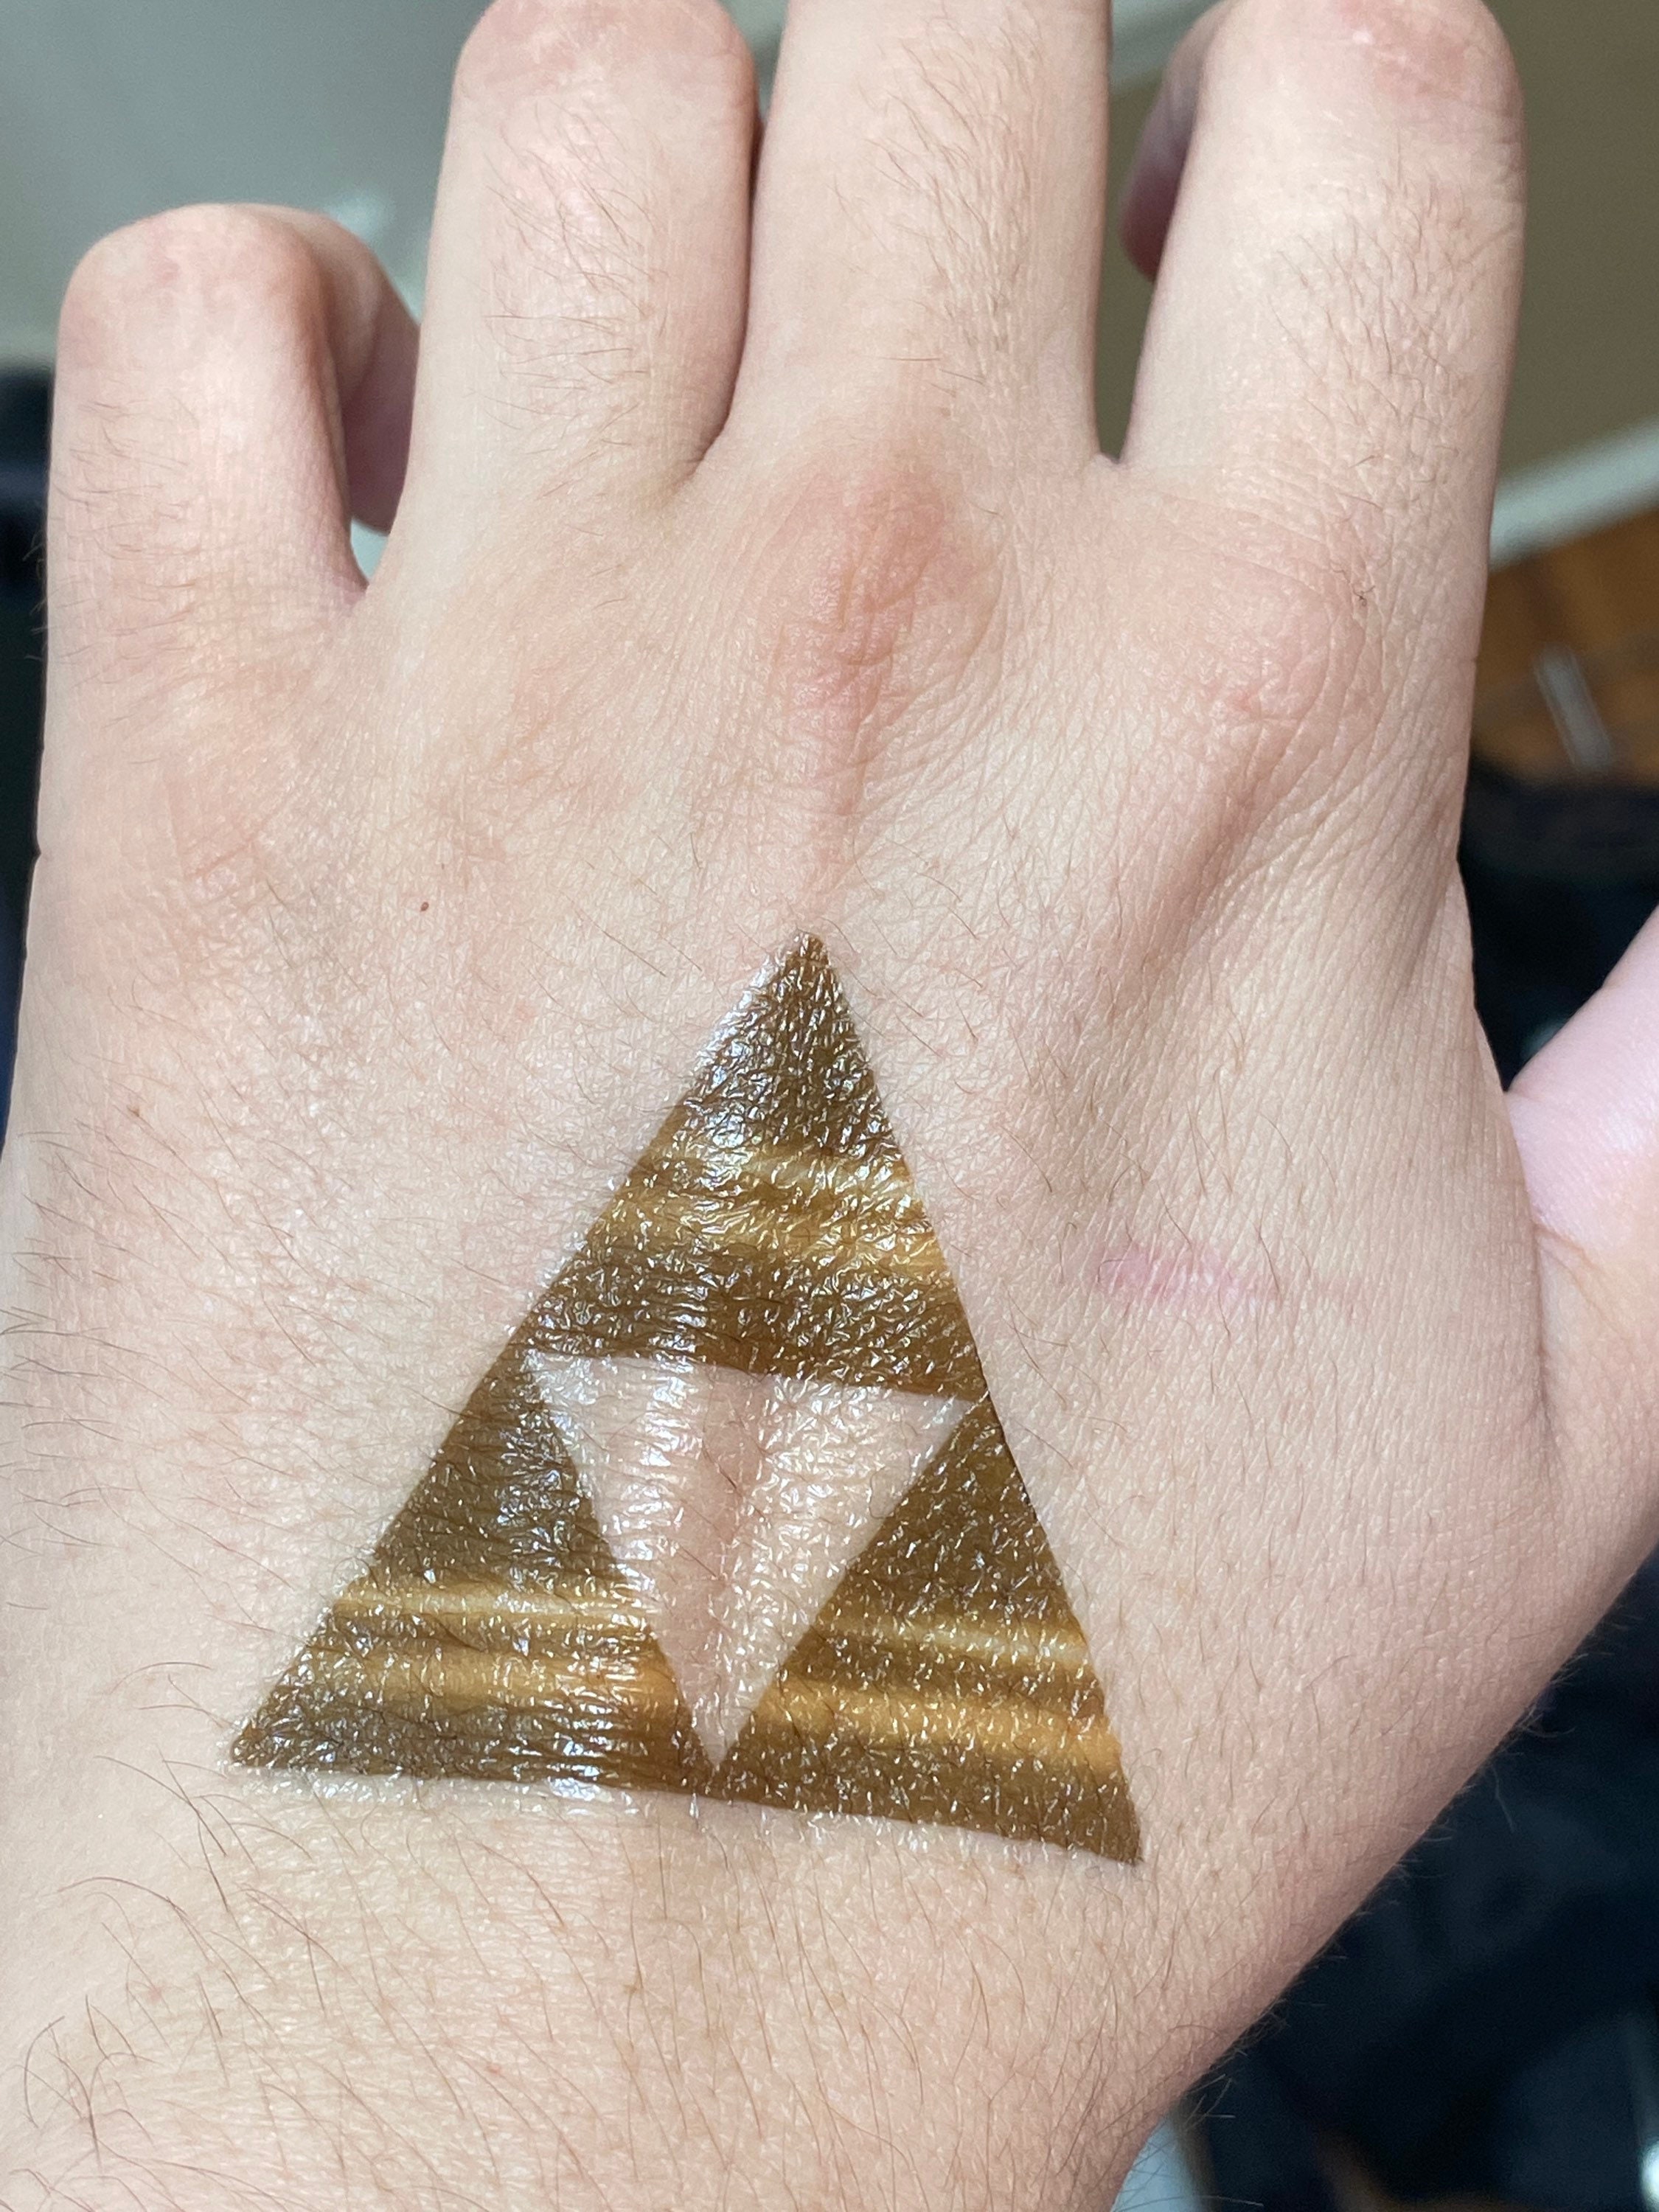 Heatstroke Tattoo  Nice work on this TRIFORCE TATTOO For all you